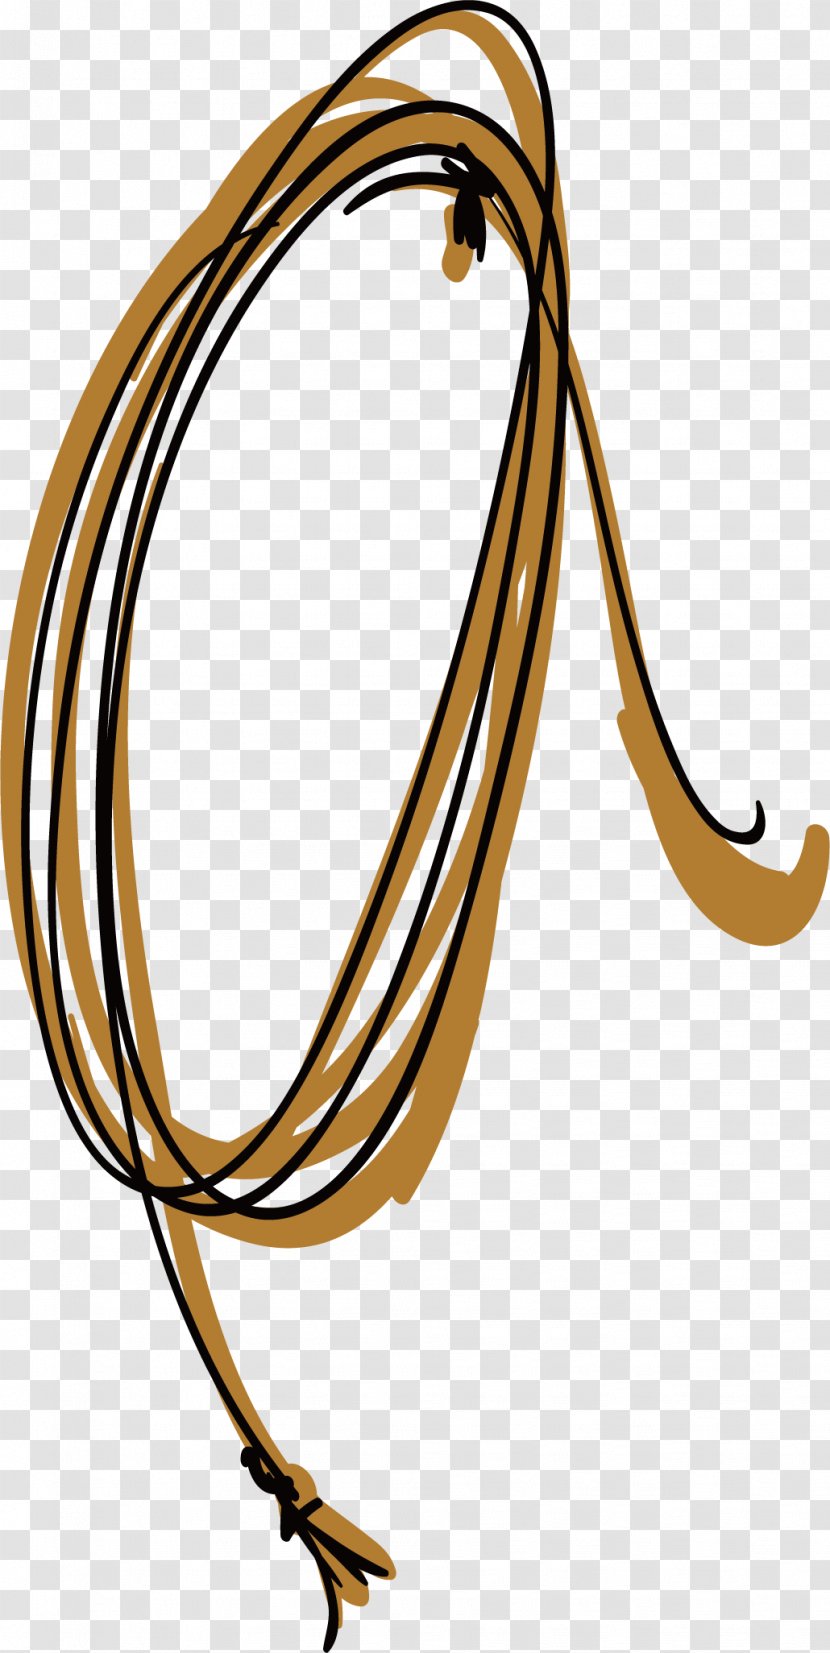 Rope - Google Images - Vector Material Transparent PNG